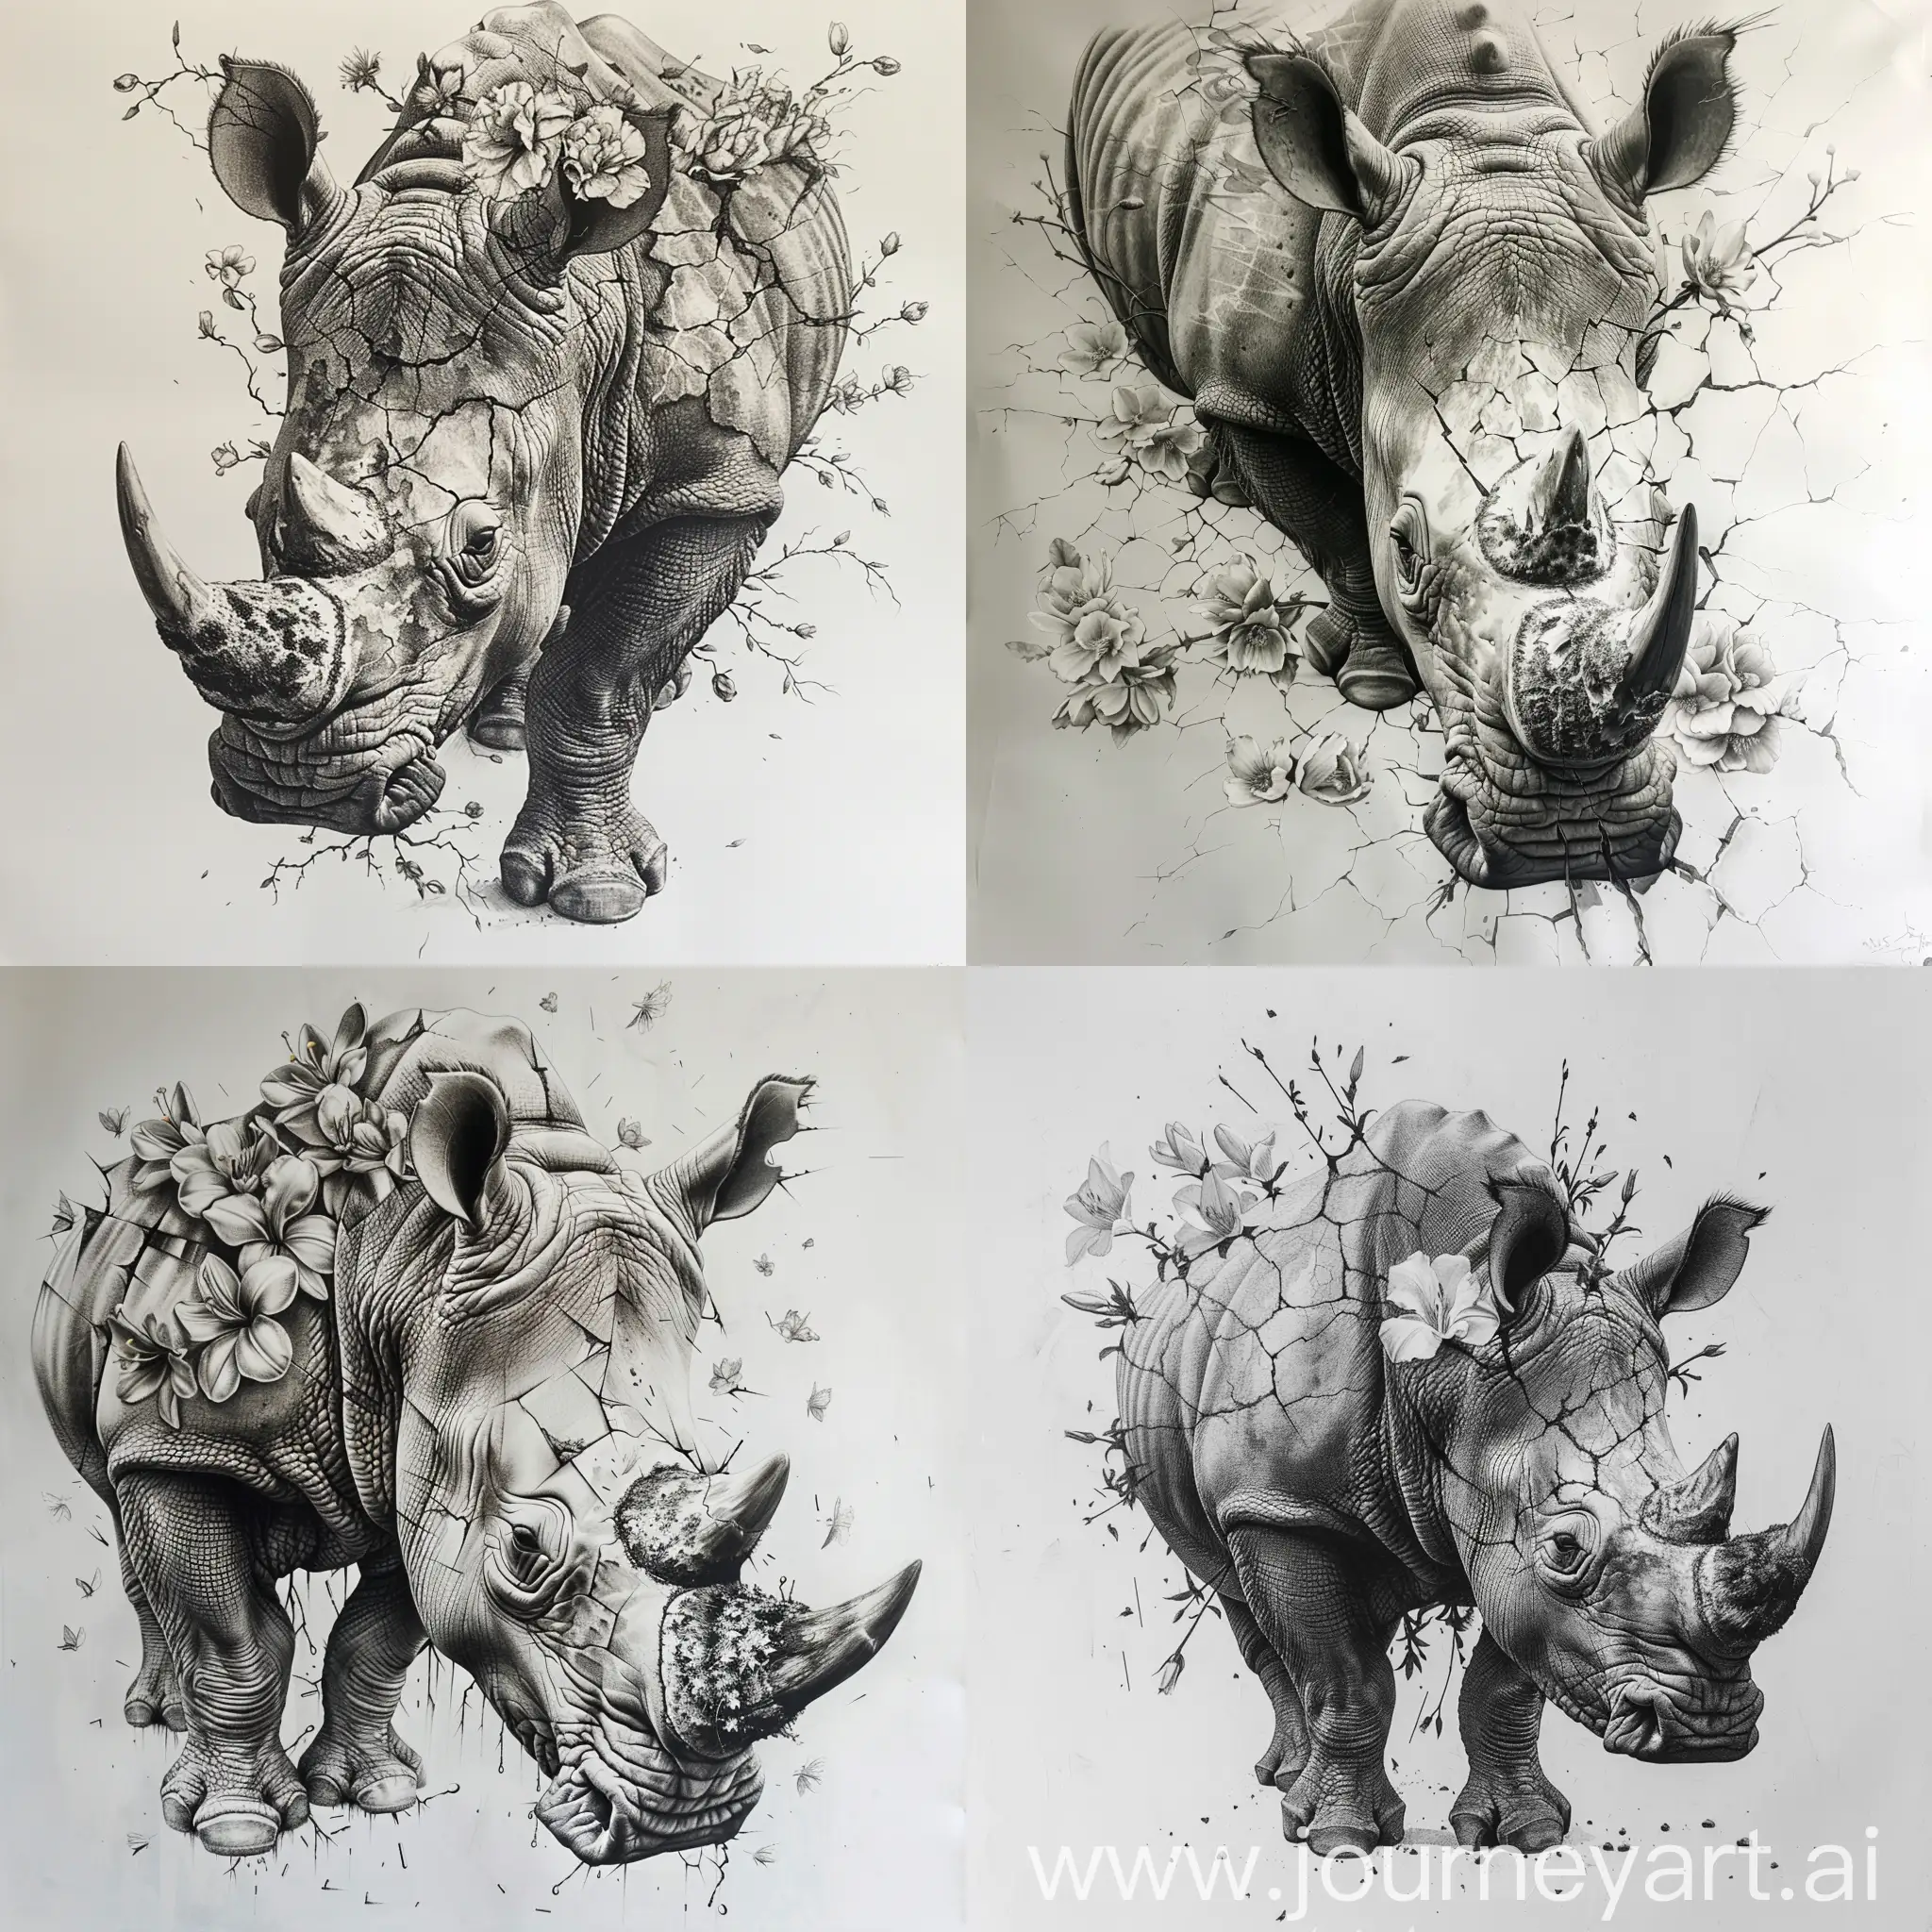 Hyper-Realistic-Rhino-Pencil-Sketch-with-Cracking-Body-and-Blooming-Flowers-on-Prism-Surface